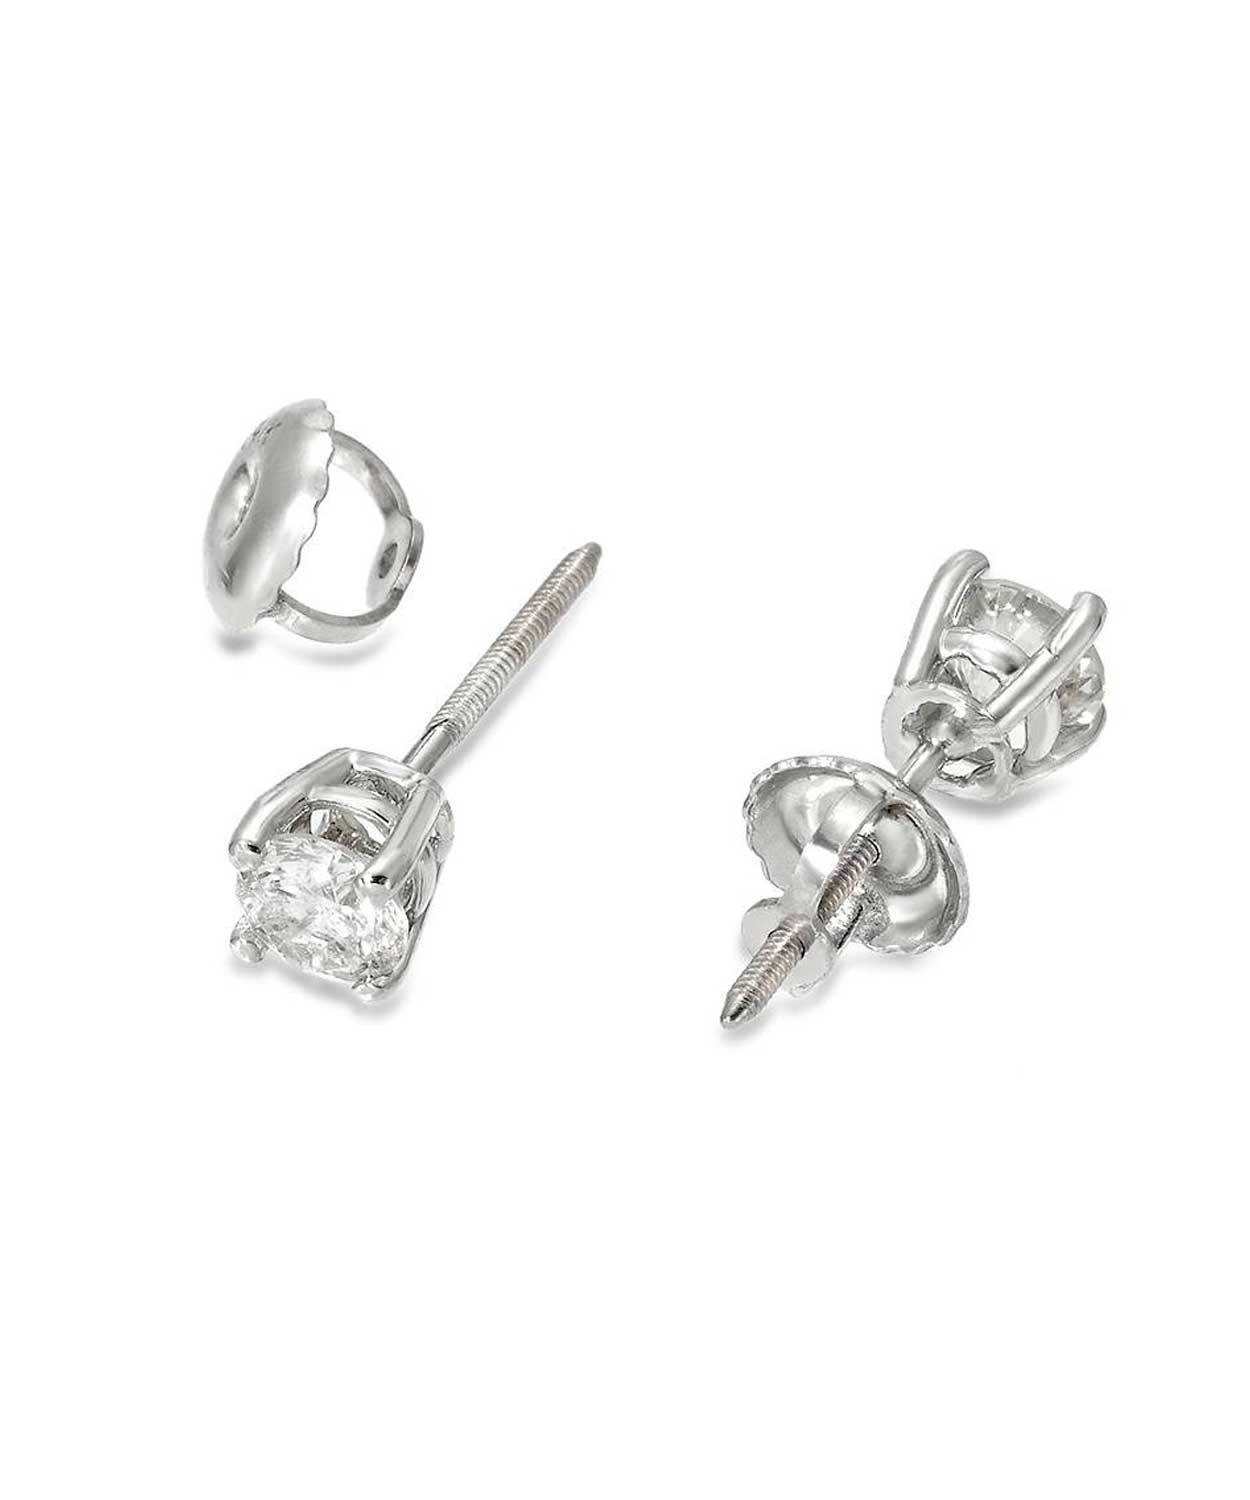 Signature Collection 0.25 ctw Diamond 14k White Gold Classic Stud Earrings View 2